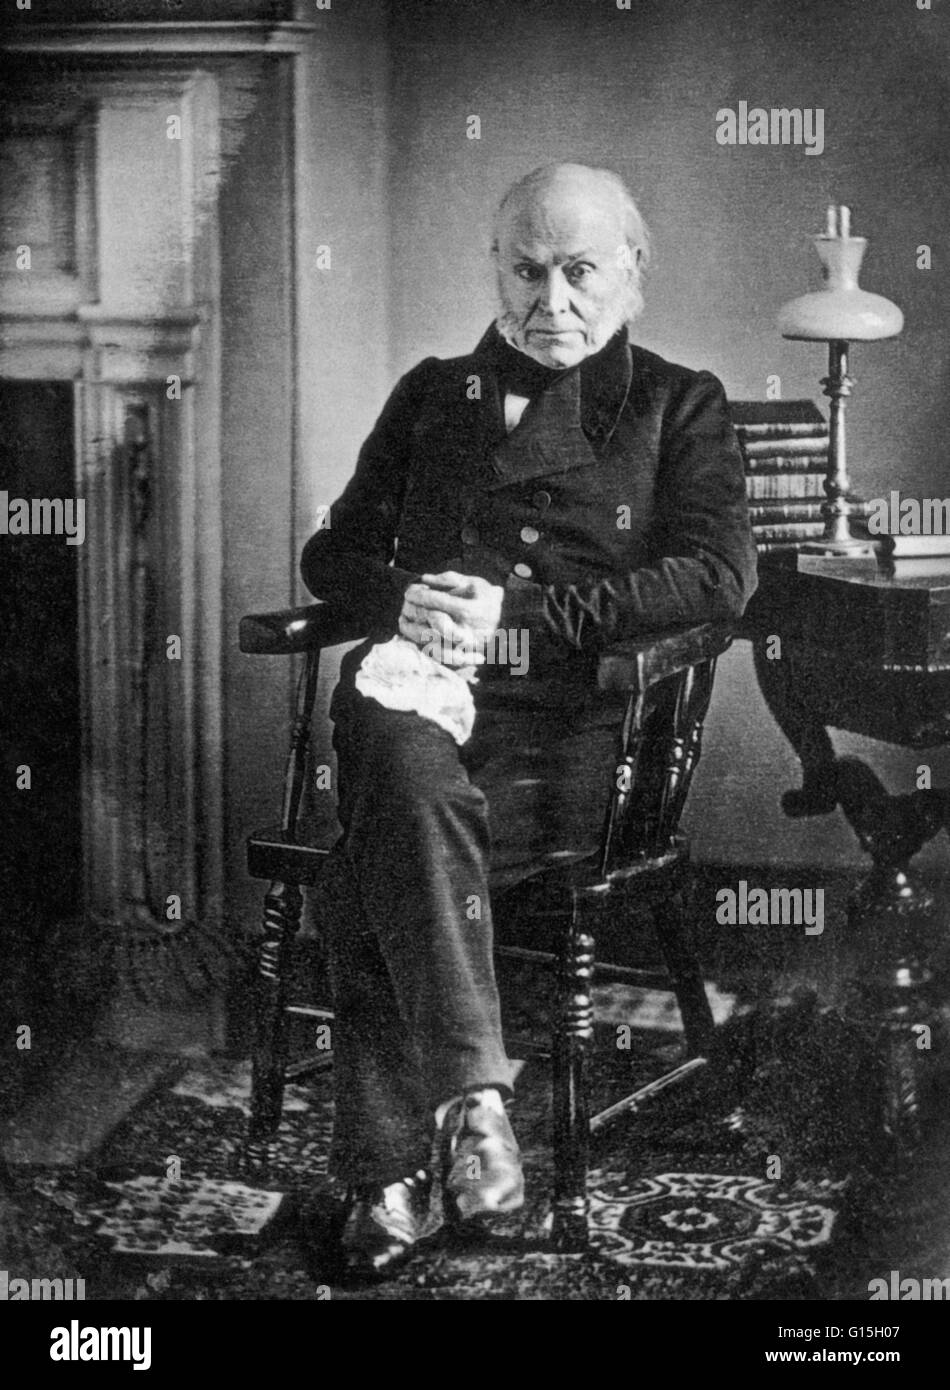 John Quincy Adams (July 11, 1767 - February 23, 1848) was the sixth President of the United States (from 1825-1829). He was also an American diplomat and served in both the Senate and House of Representatives. He was a member of the Federalist, Democratic Stock Photo